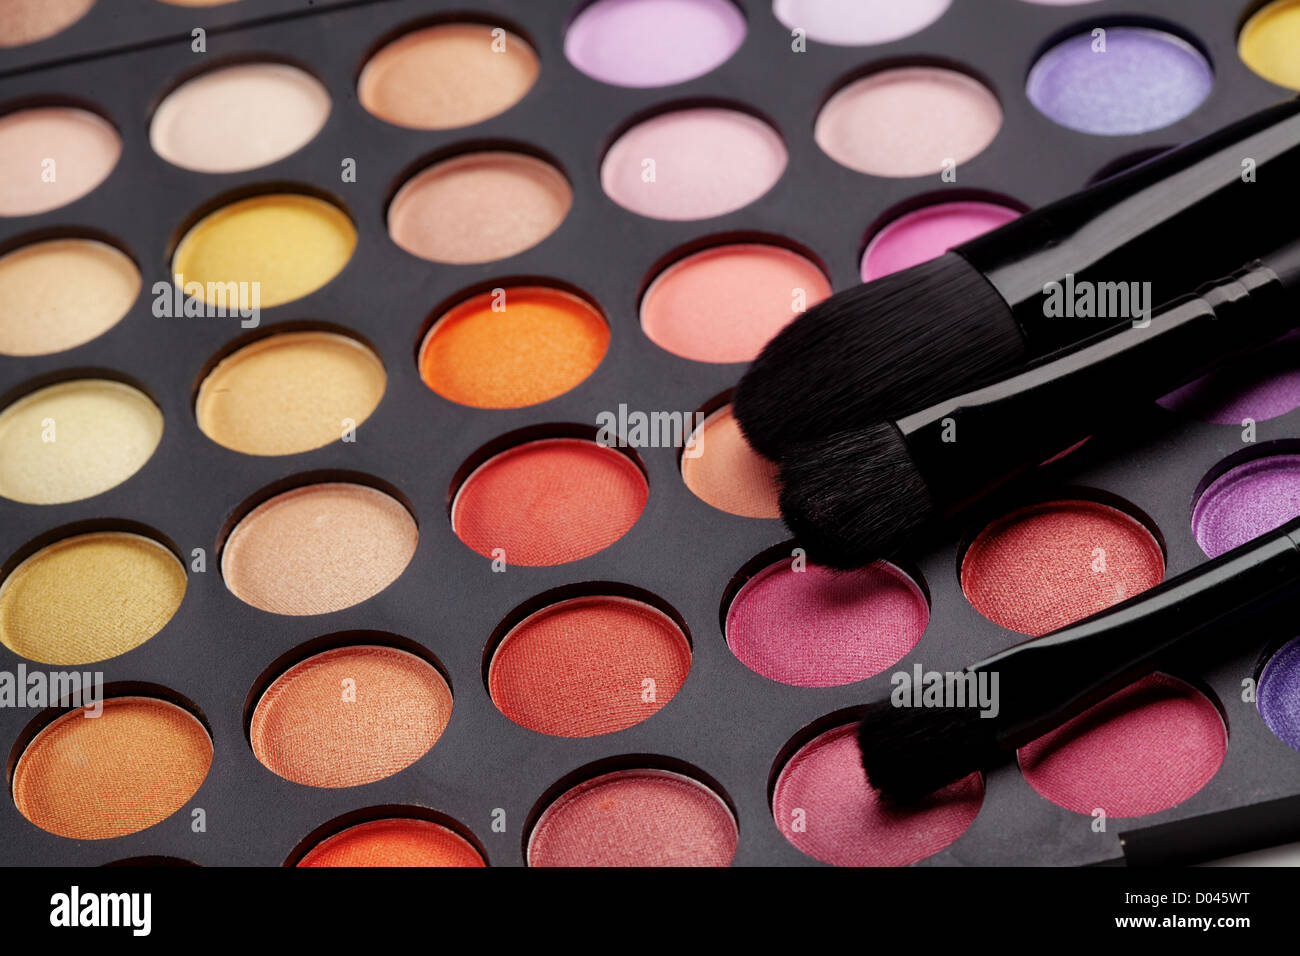 Make-up colorful eyeshadow palette with makeup brushes on it Stock Photo